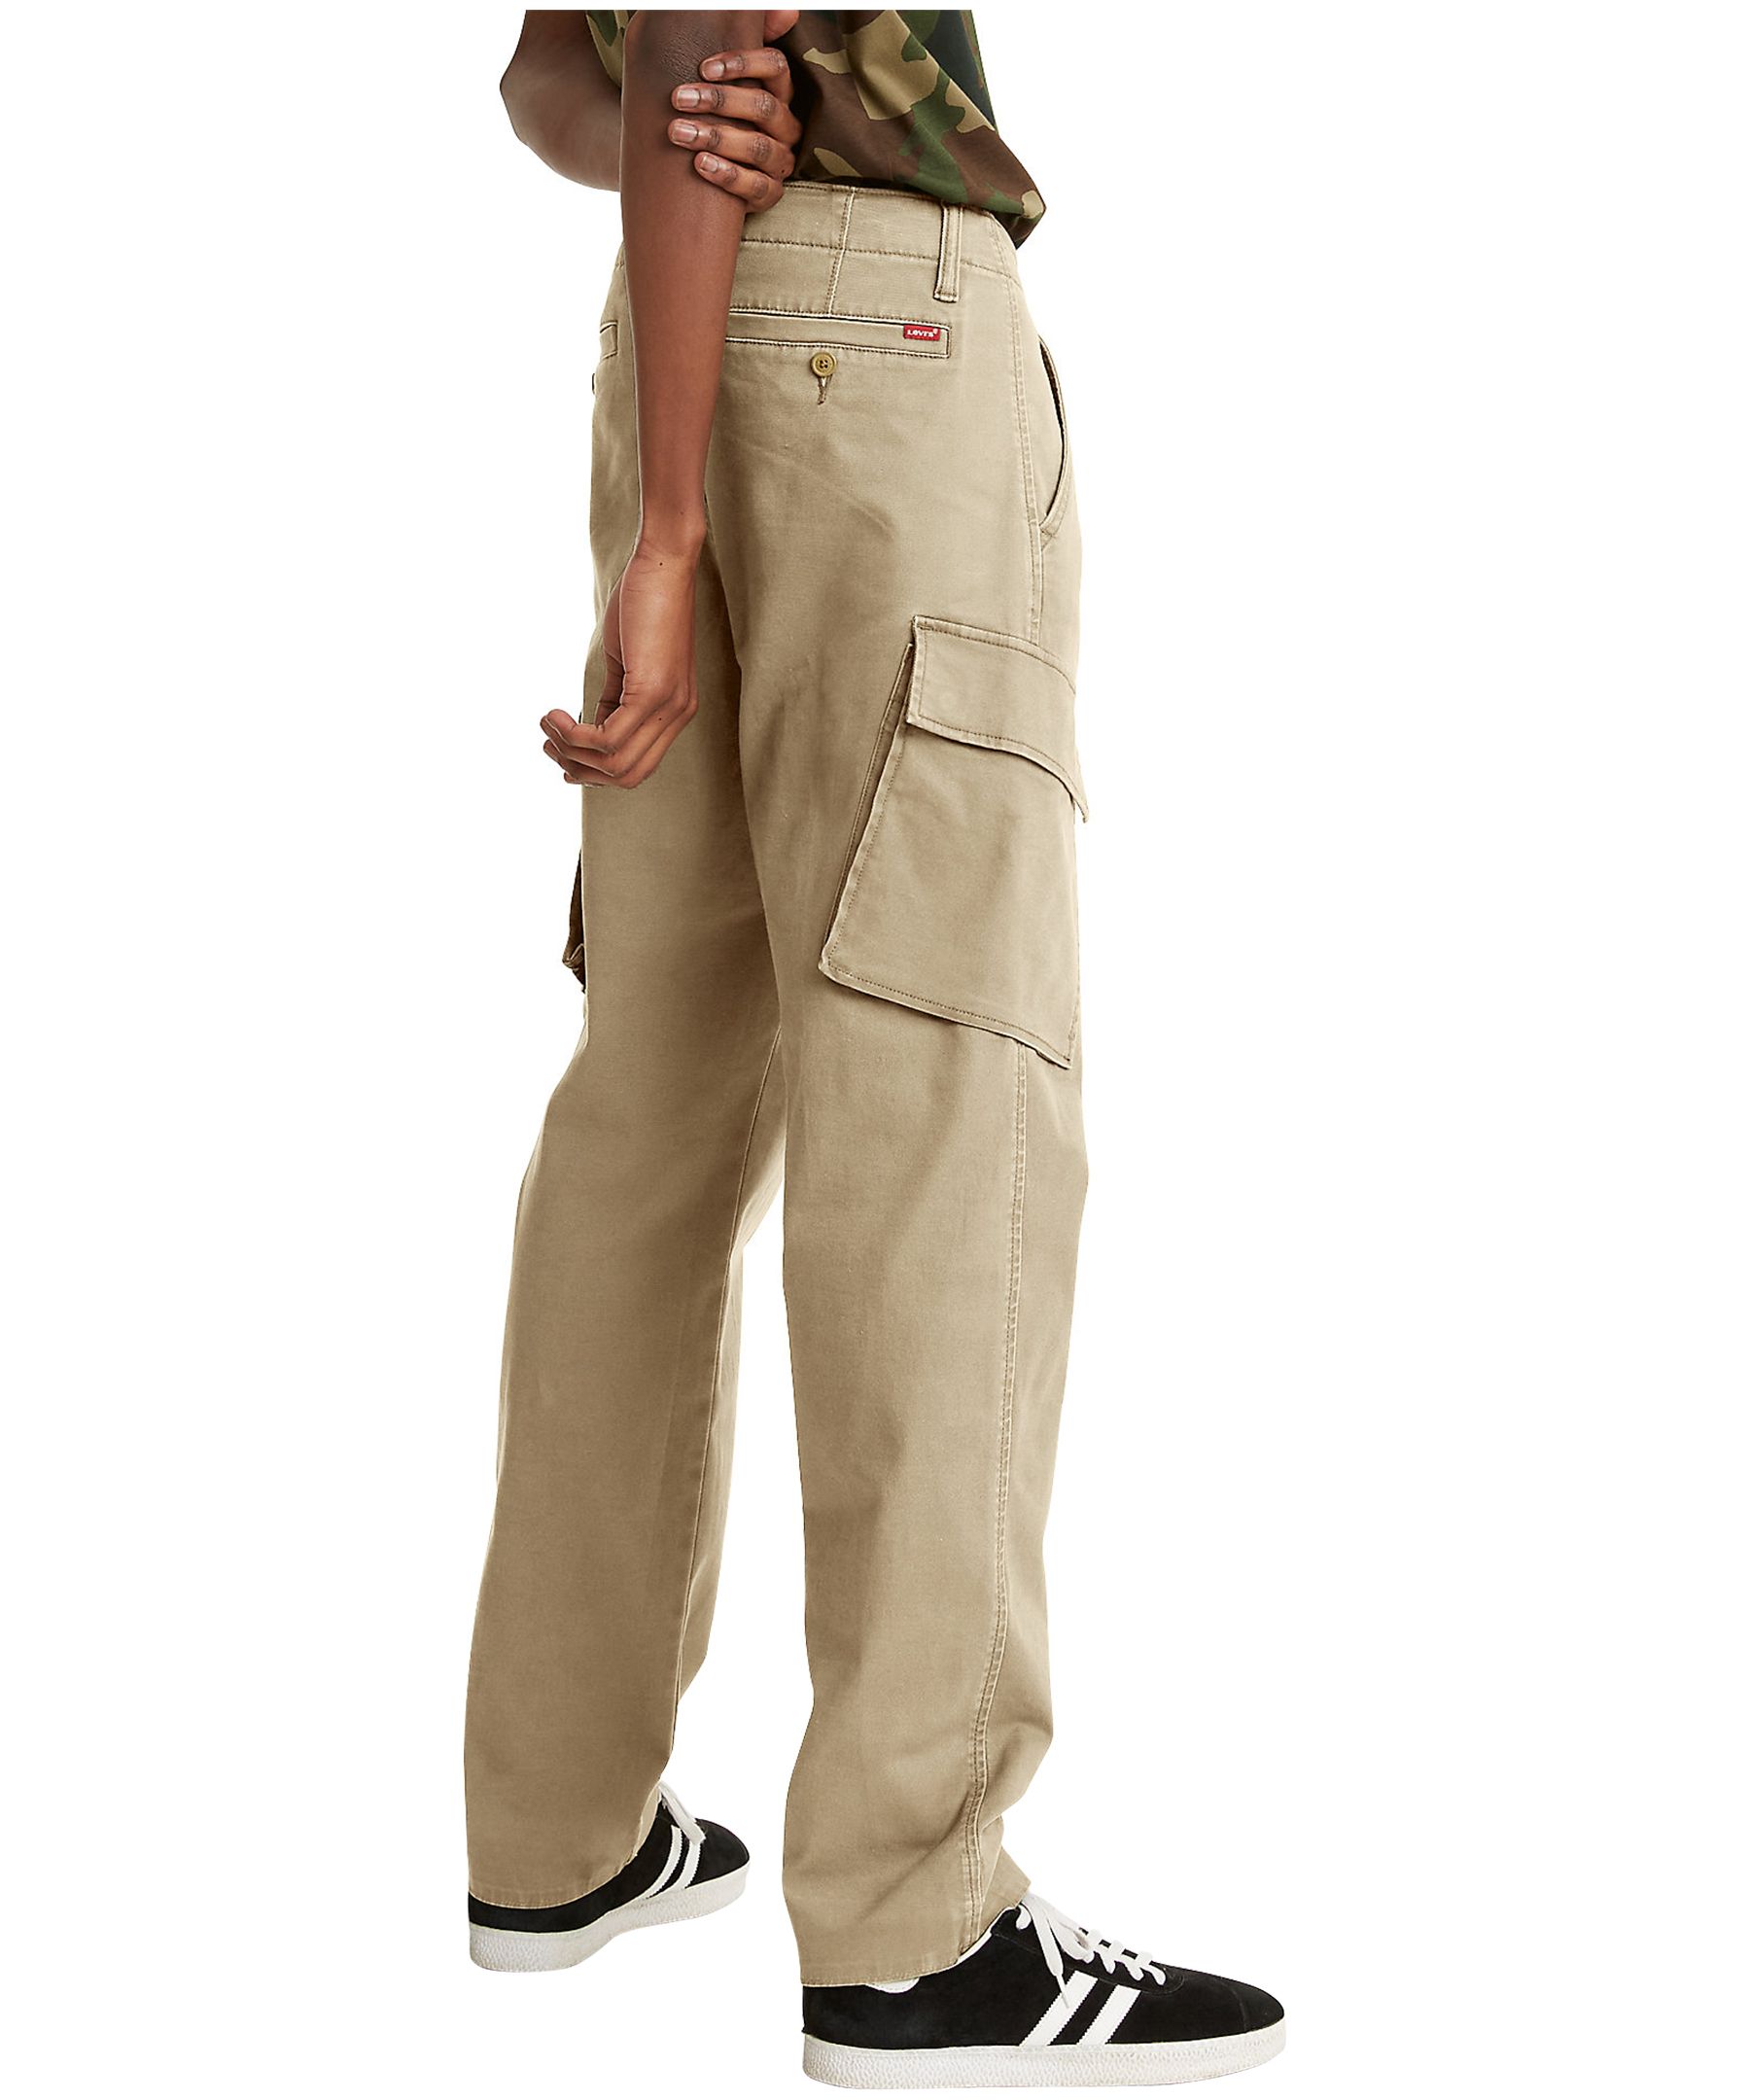 Levi's Men's XX Chino Low Rise Taper Fit Cotton Twill Cargo Pants